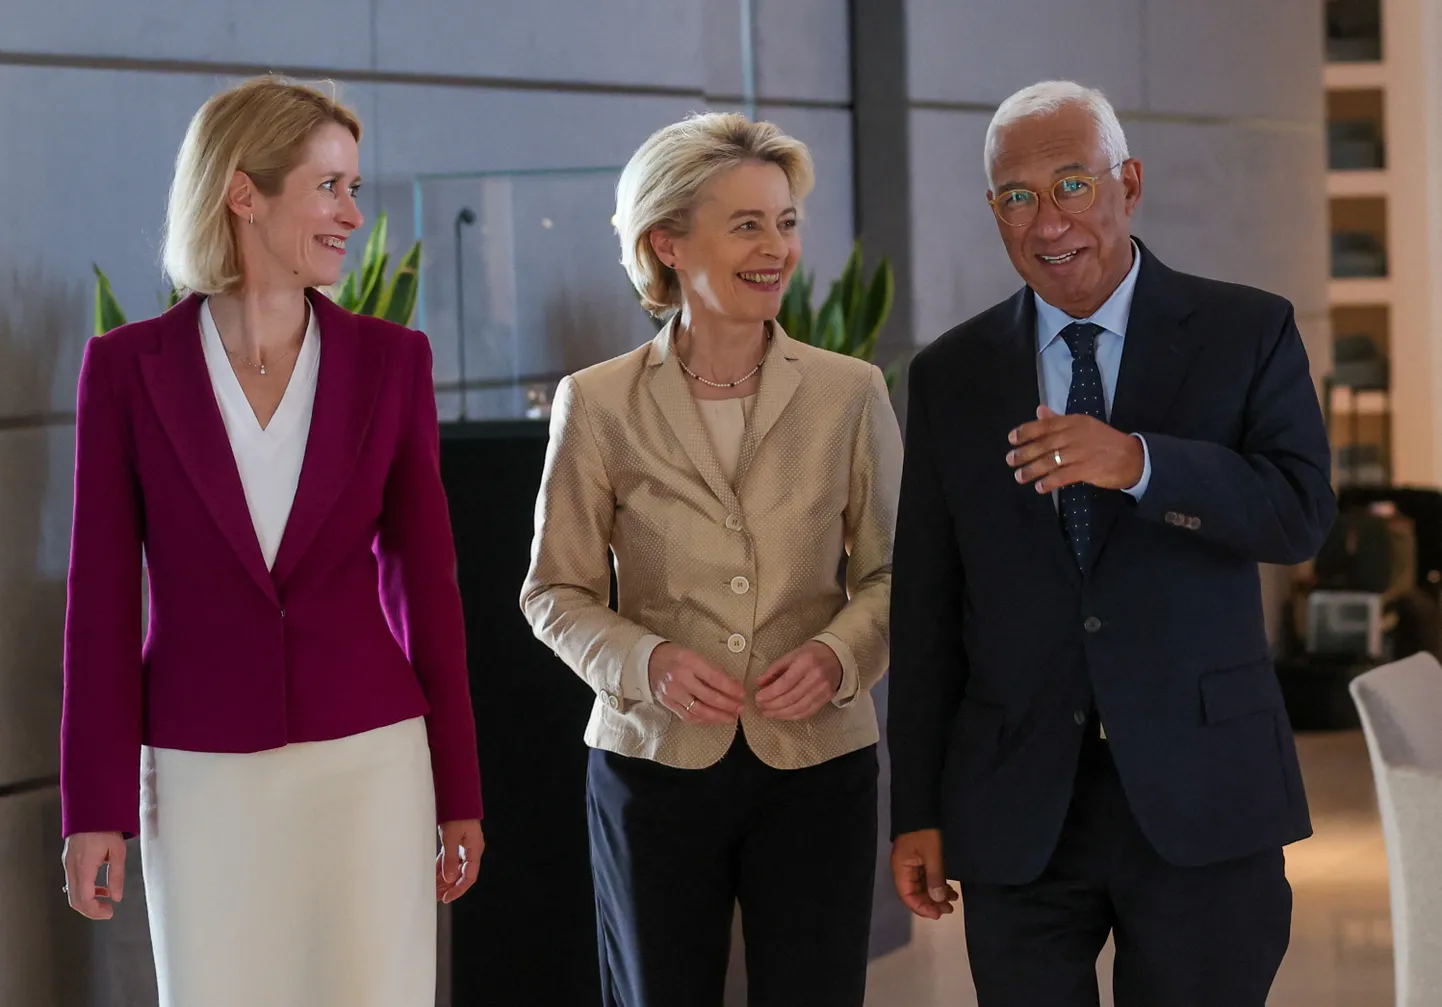 EU leaders agreed on proposing Kaja Kallas as High Representative of the Union for Foreign Affairs and Security Policy and Ursula Von der Leyen as a candidate for President of the European Commission. Antonio Costa was elected as European Council President.